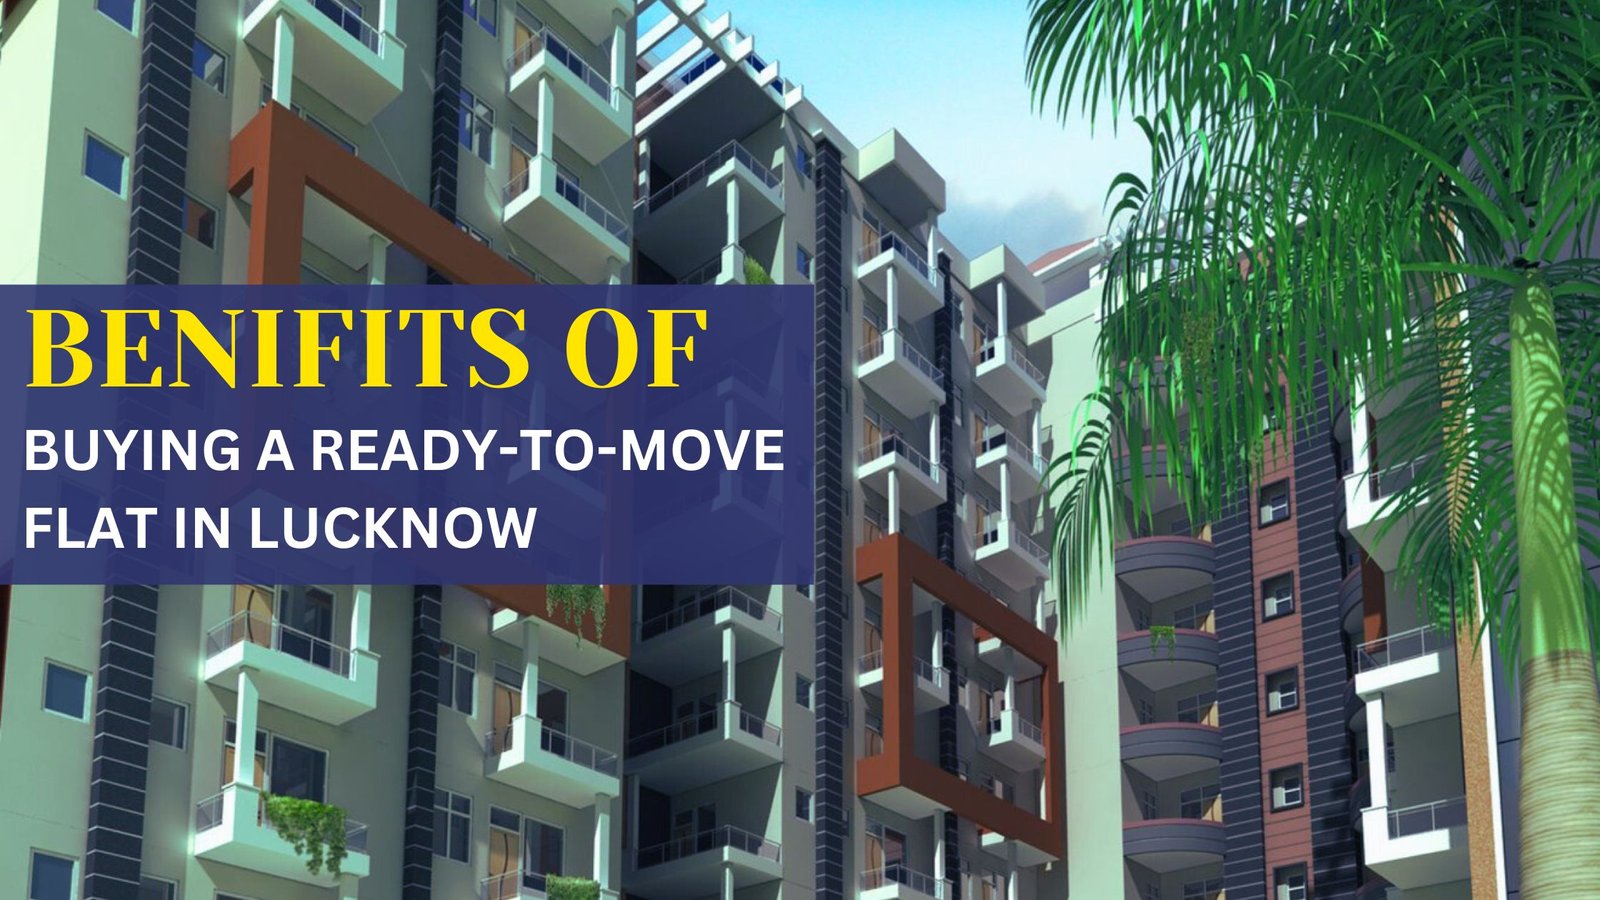 The Benefits Of Buying A Ready-To-Move Flat In Lucknow